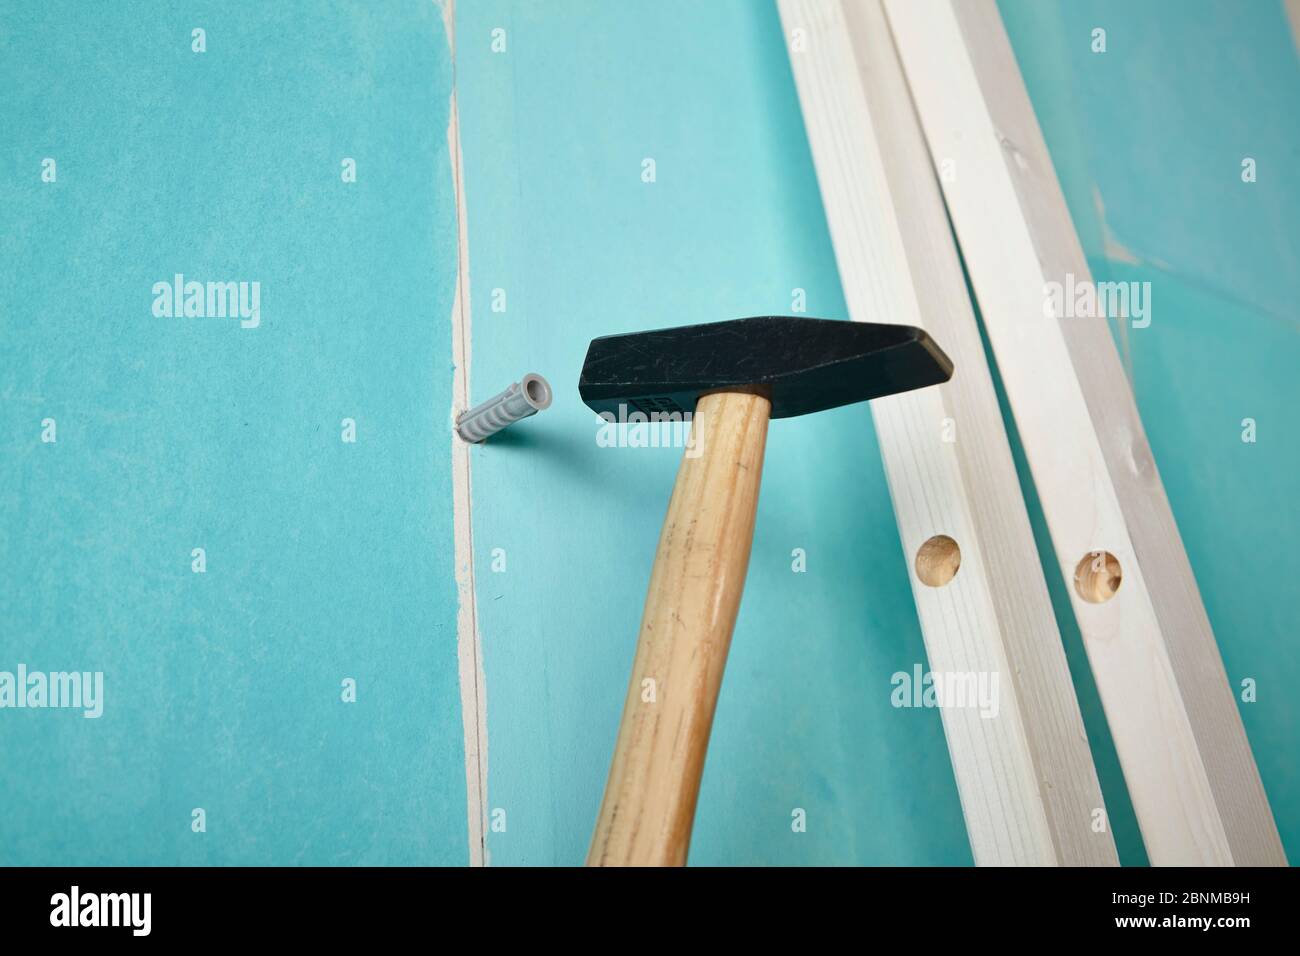 DIY wall design 02, step-by-step do-it-yourself production, various turquoise colored areas separated by white wooden strips, Step 11: hammer in a dowel into the hole in the wall to attach the strips Stock Photo